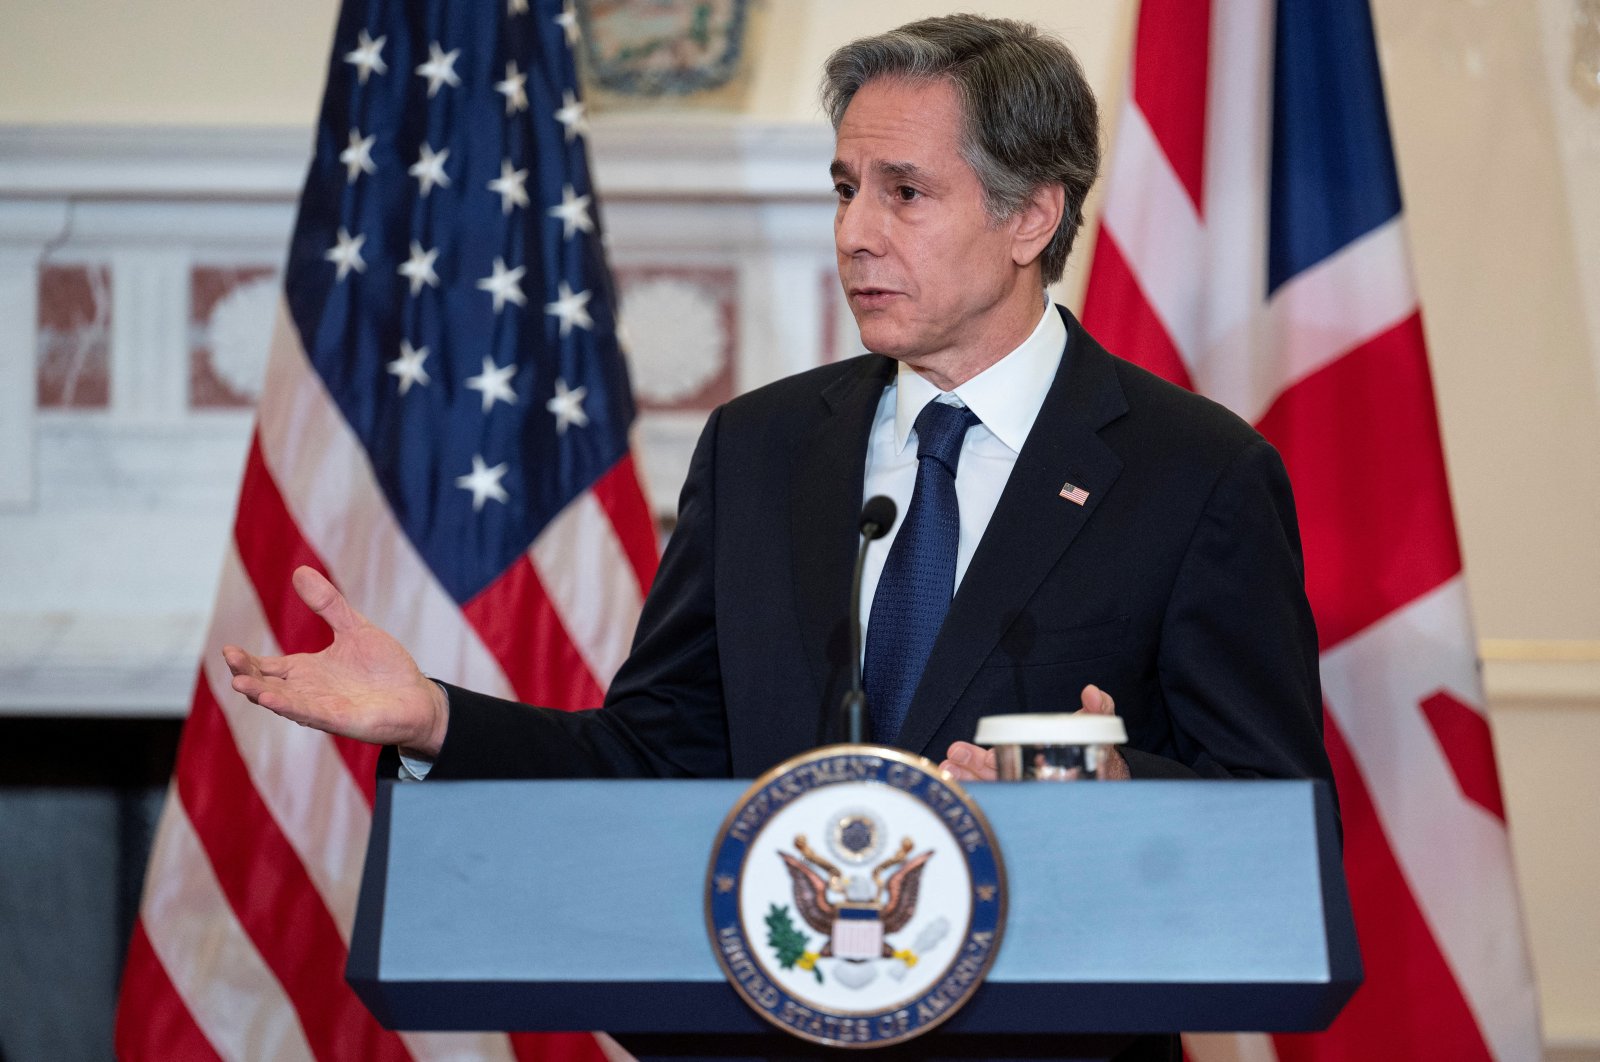 U.S. Secretary of State Antony Blinken holds a joint press conference with British Foreign Secretary Elizabeth Truss (not pictured) in the Benjamin Franklin Room of the State Department in Washington, D.C., U.S., March 9, 2022. (Reuters Photo)